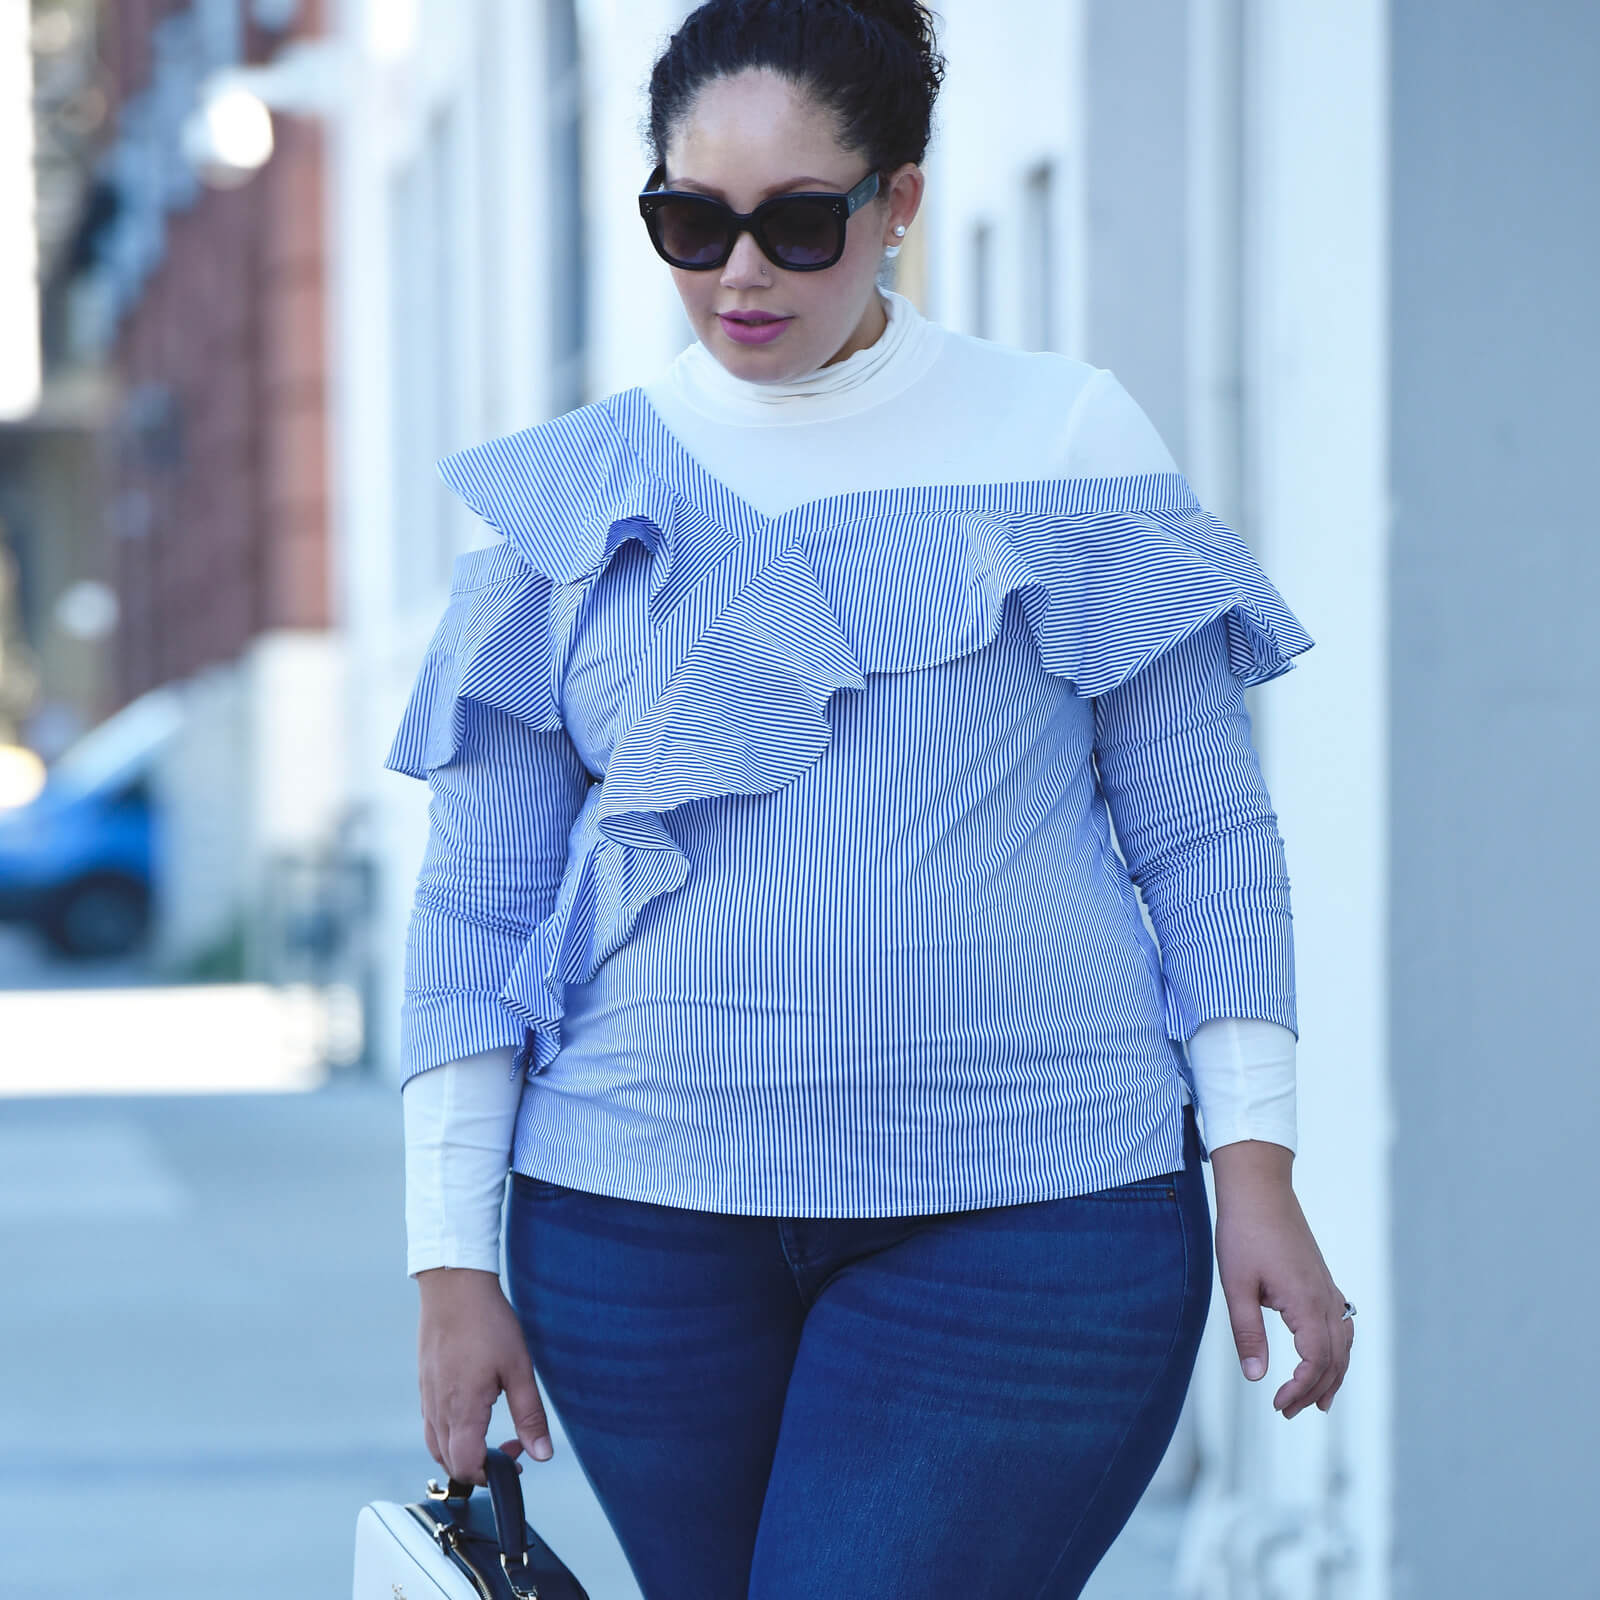 How To Transition A Summer Top Into Fall | Girl With Curves